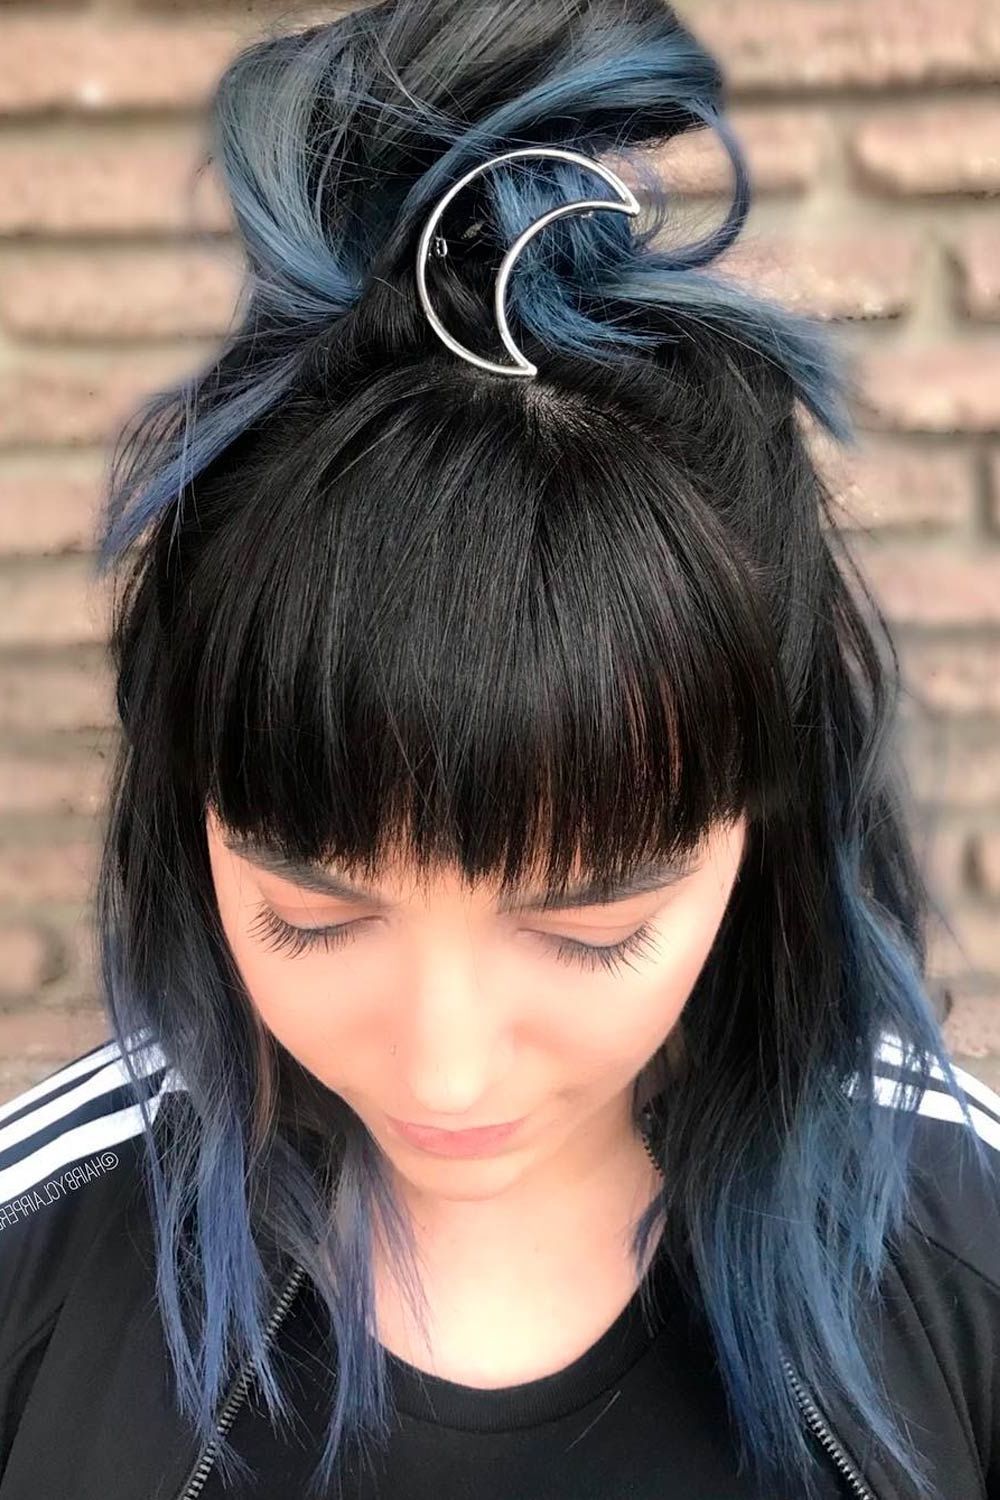 15 Hairstyles With Bun And Bangs | Lovehairstyles Throughout High Bun With A Side Fringe (View 19 of 25)